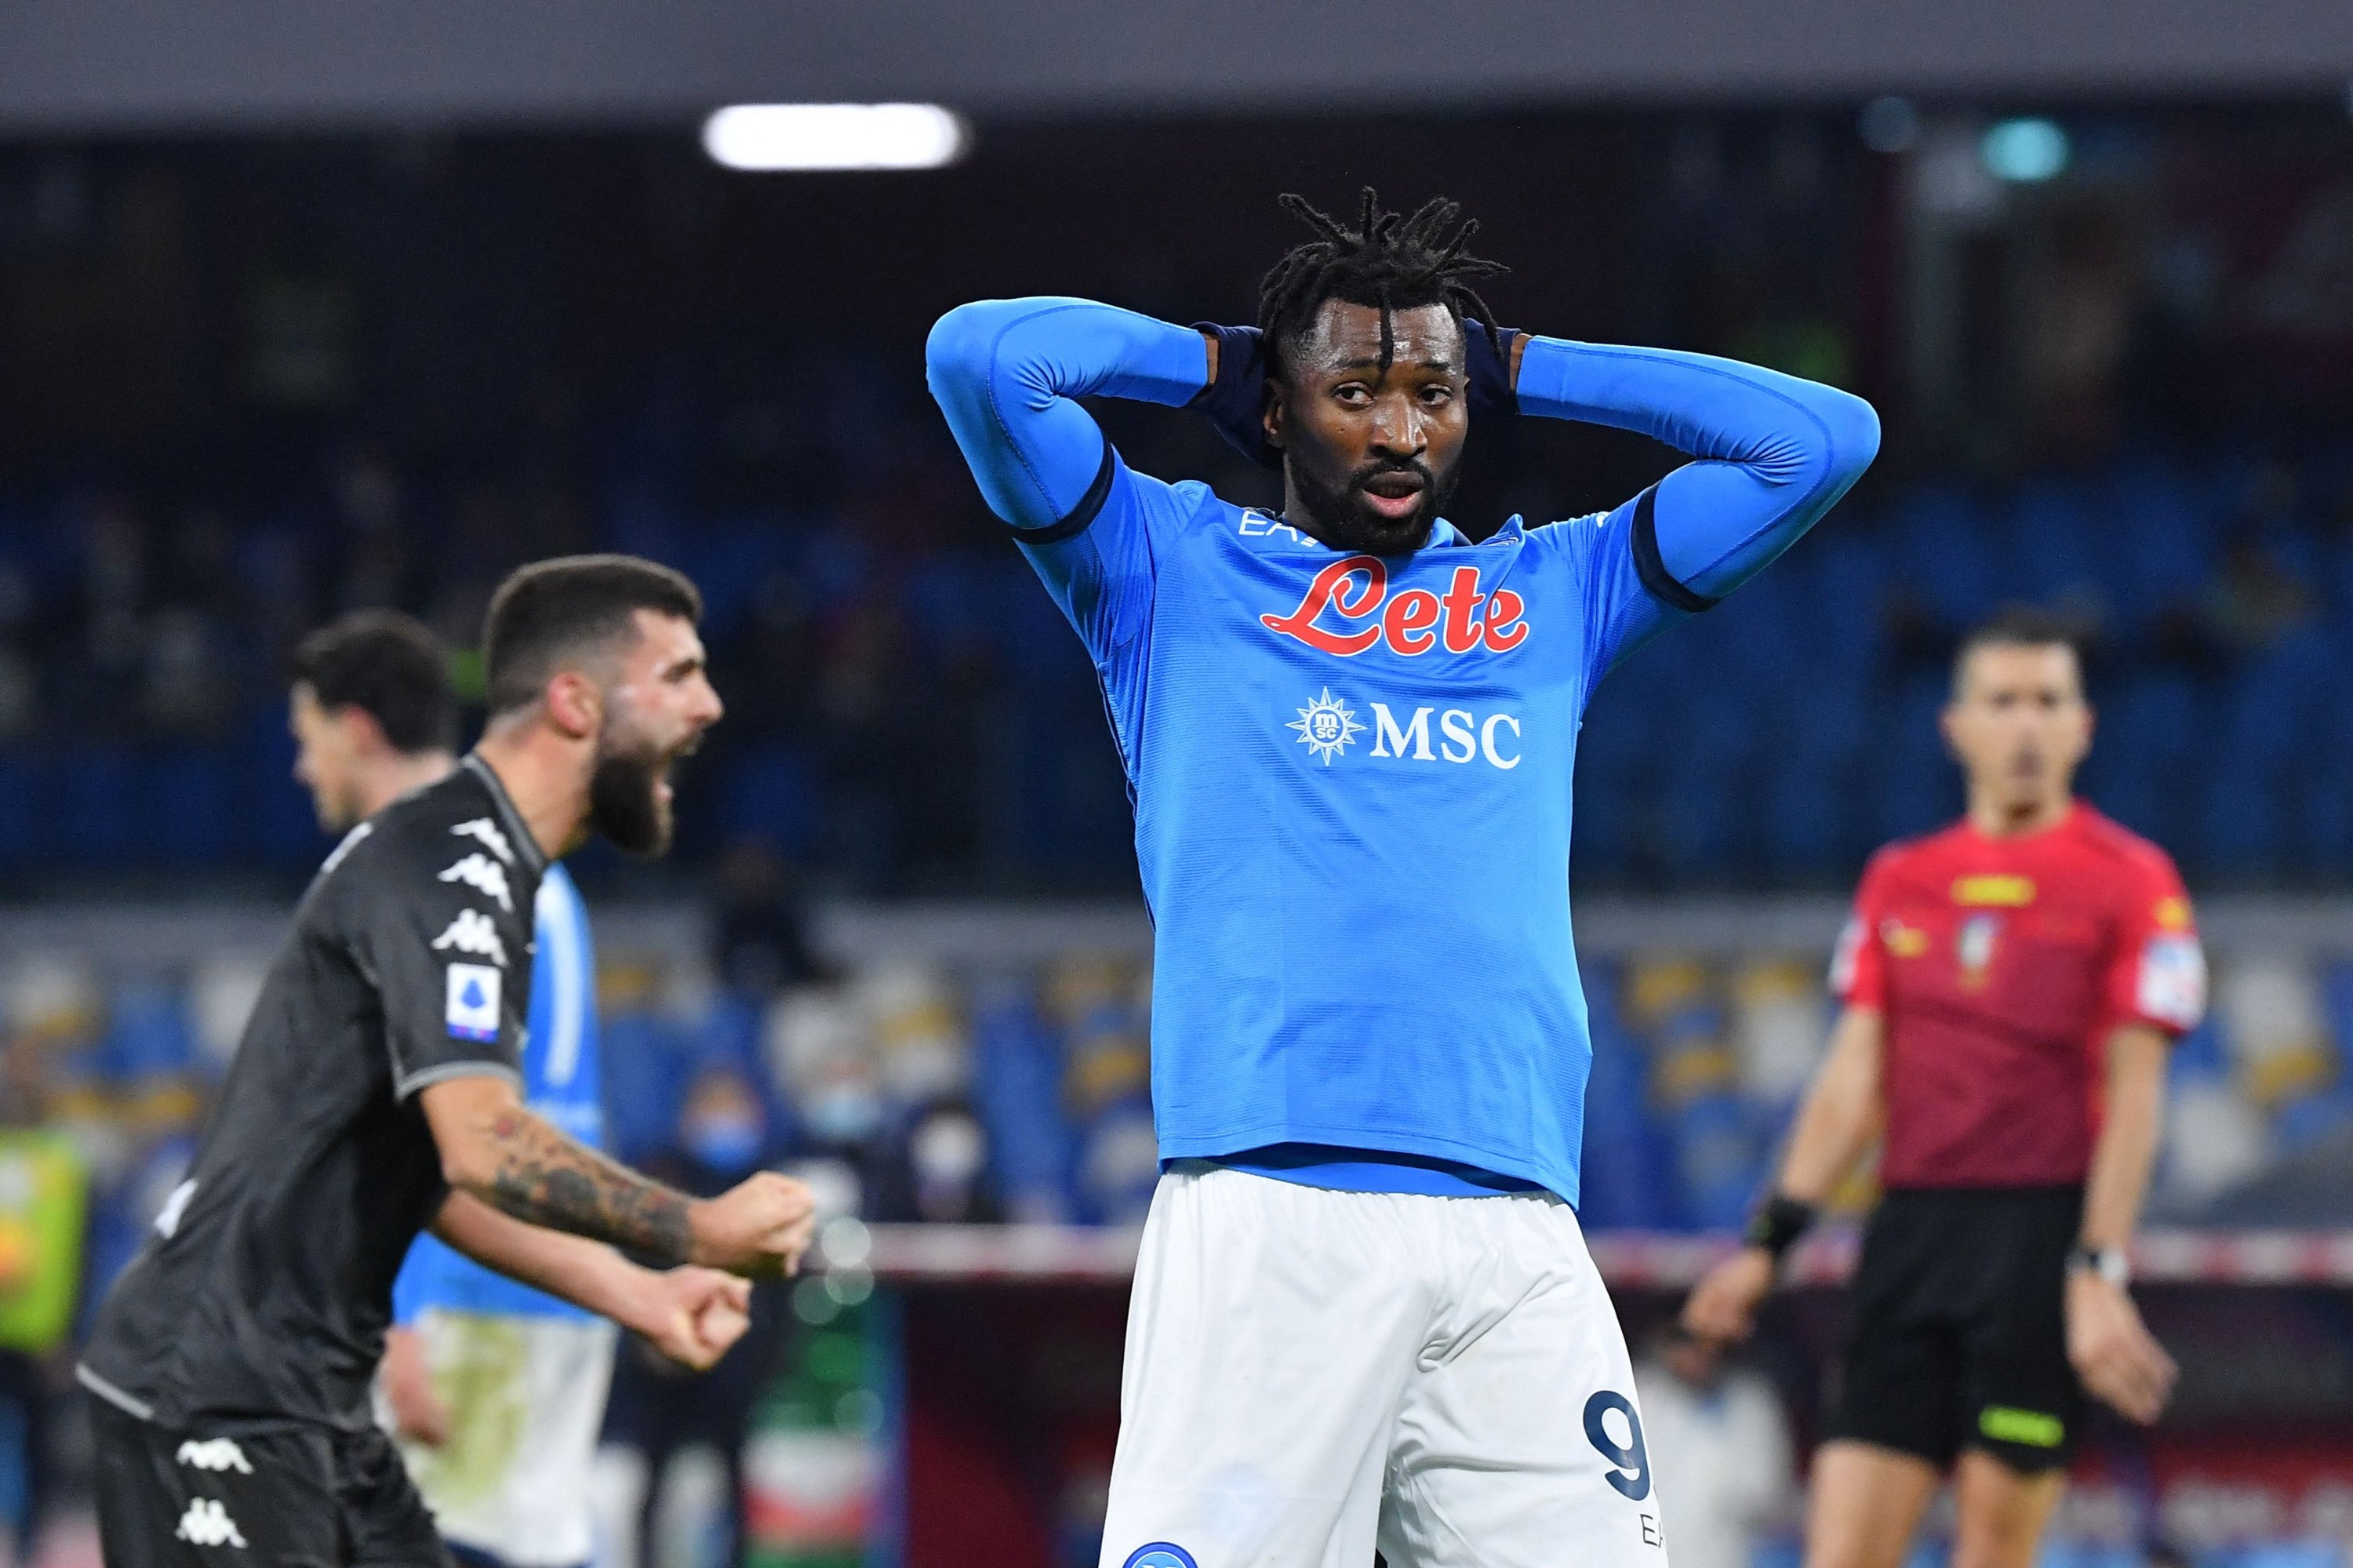 Napoli's Andre-Frank Zambo Anguissa reacts during a Serie A match against Empoli, Naples, Italy, Dec. 12, 2021. (AFP Photo)